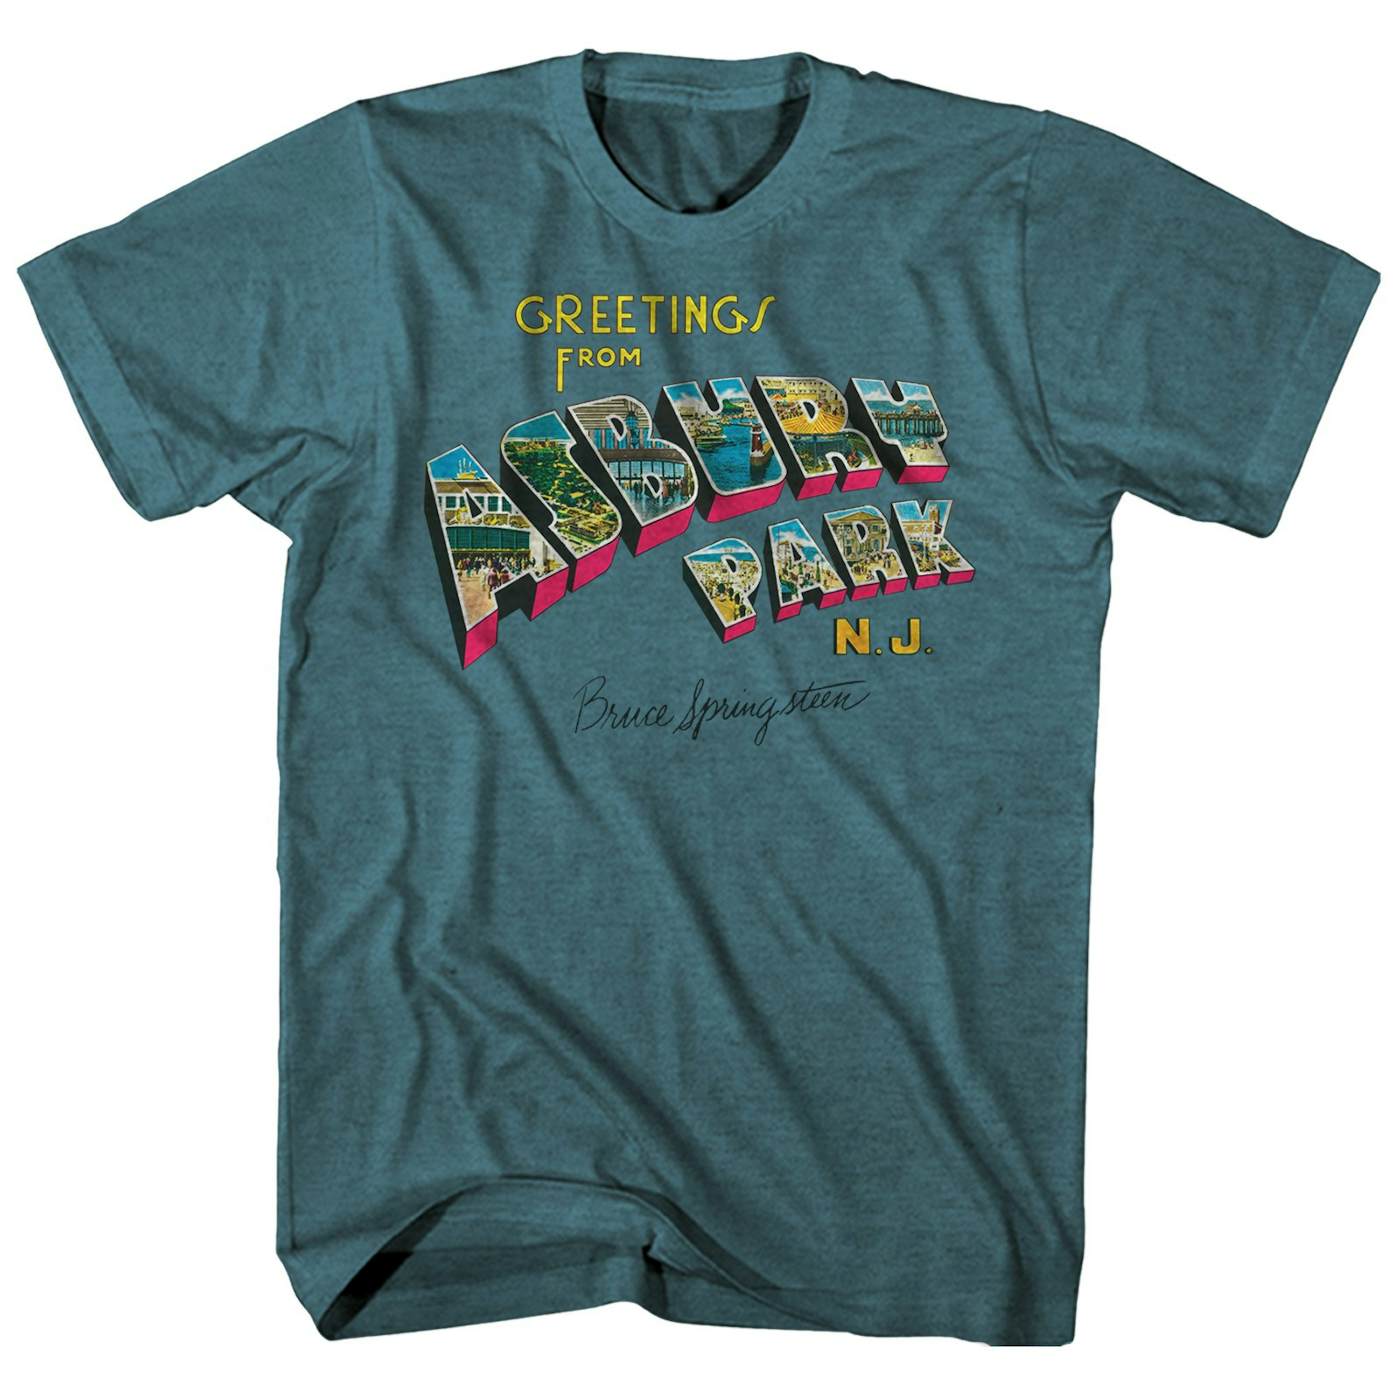 Bruce Springsteen T-Shirt | Greetings From Asbury Park Album Cover Art Bruce Springsteen T-Shirt